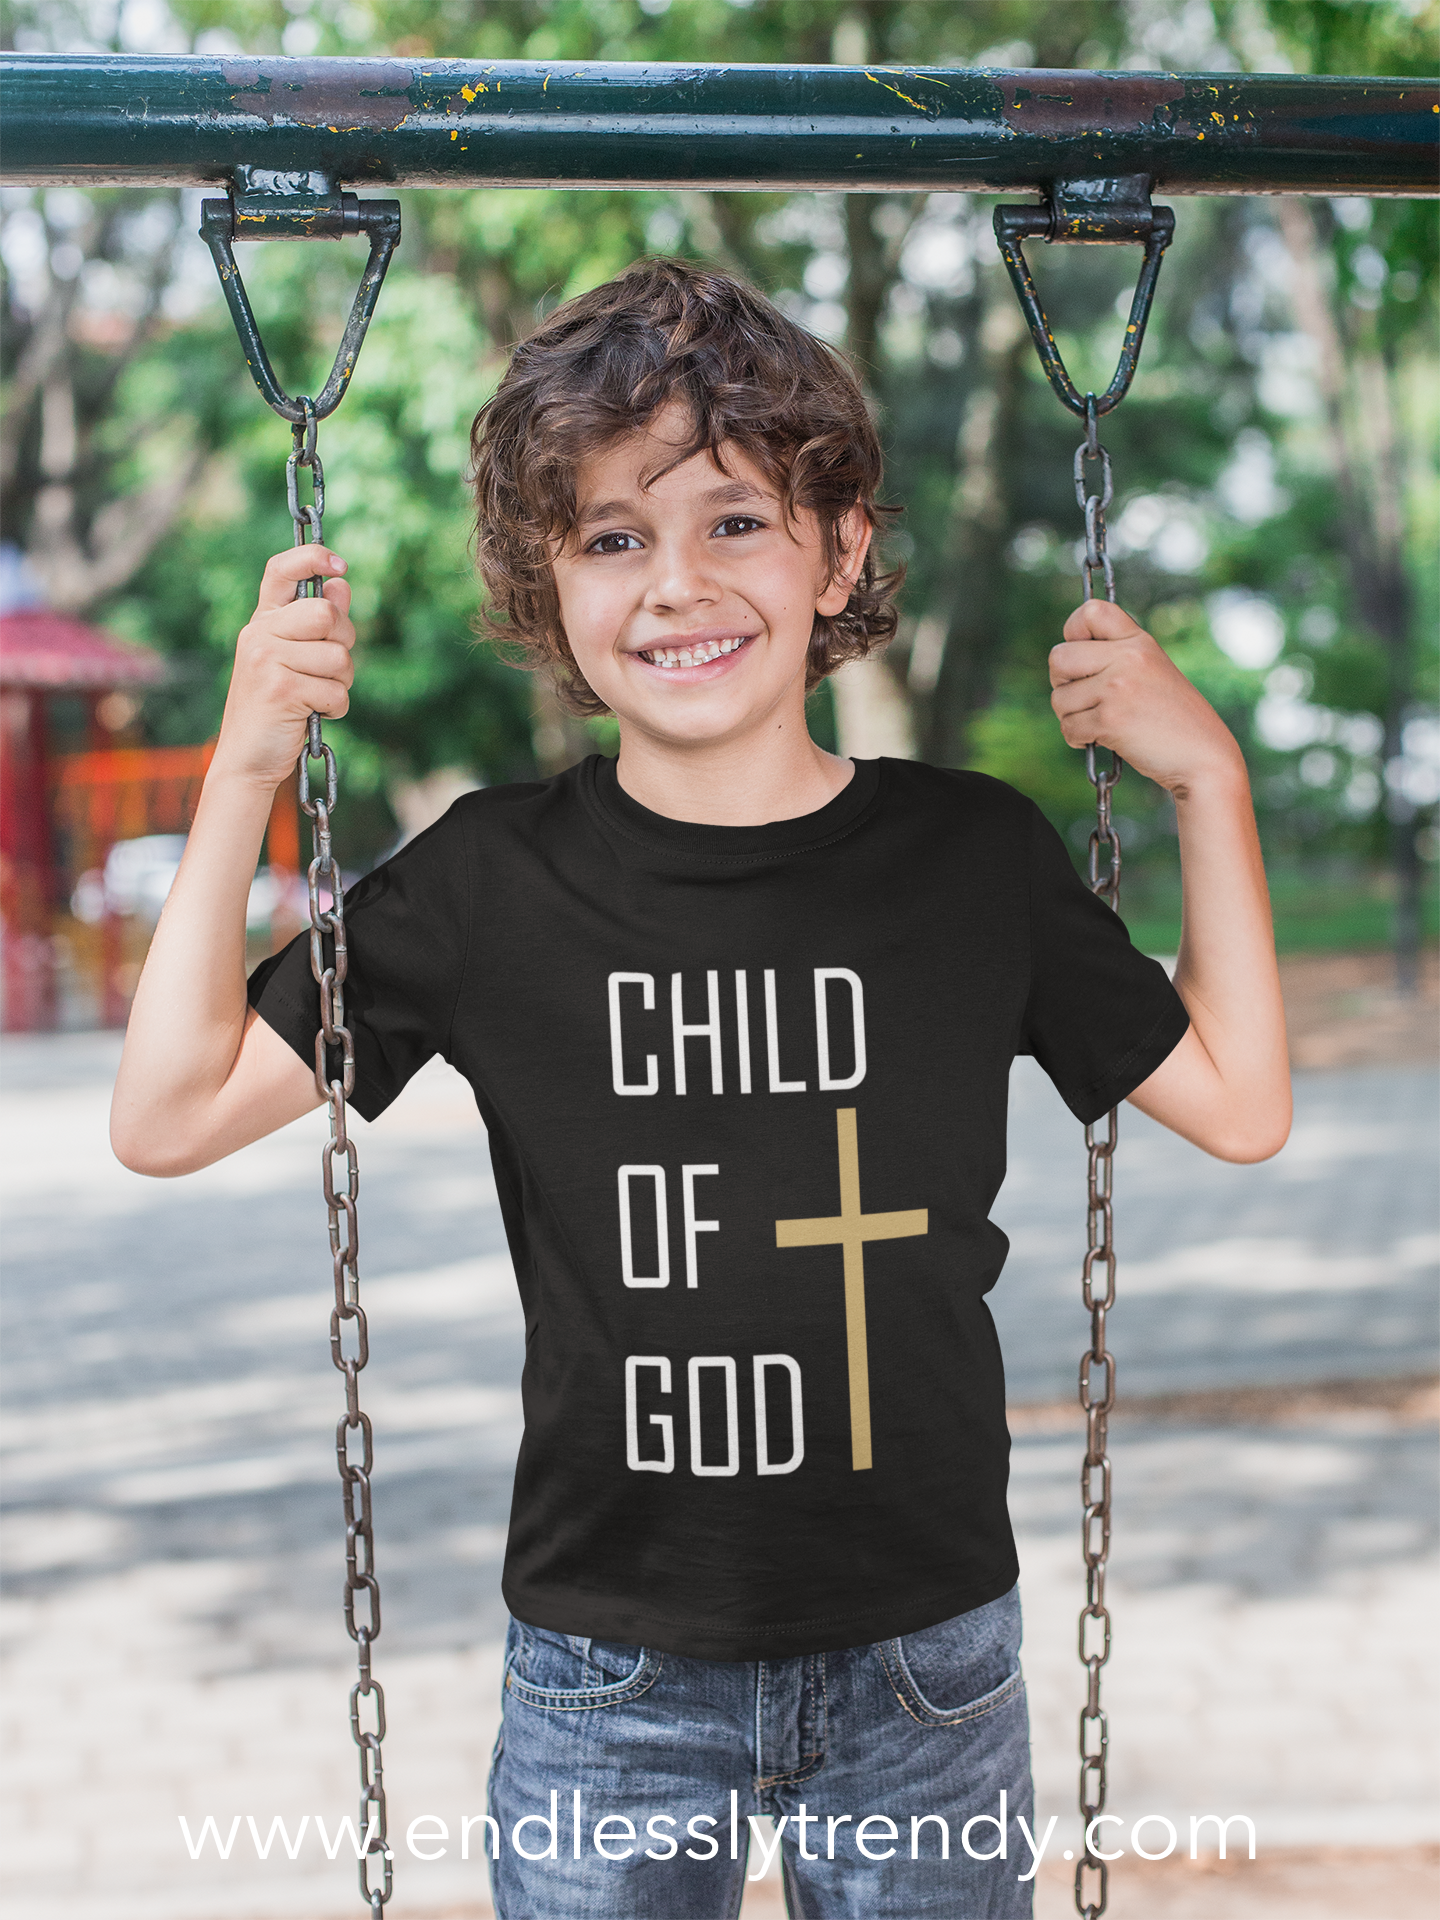 Child of God Tee - Endlessly Trendy Boutique